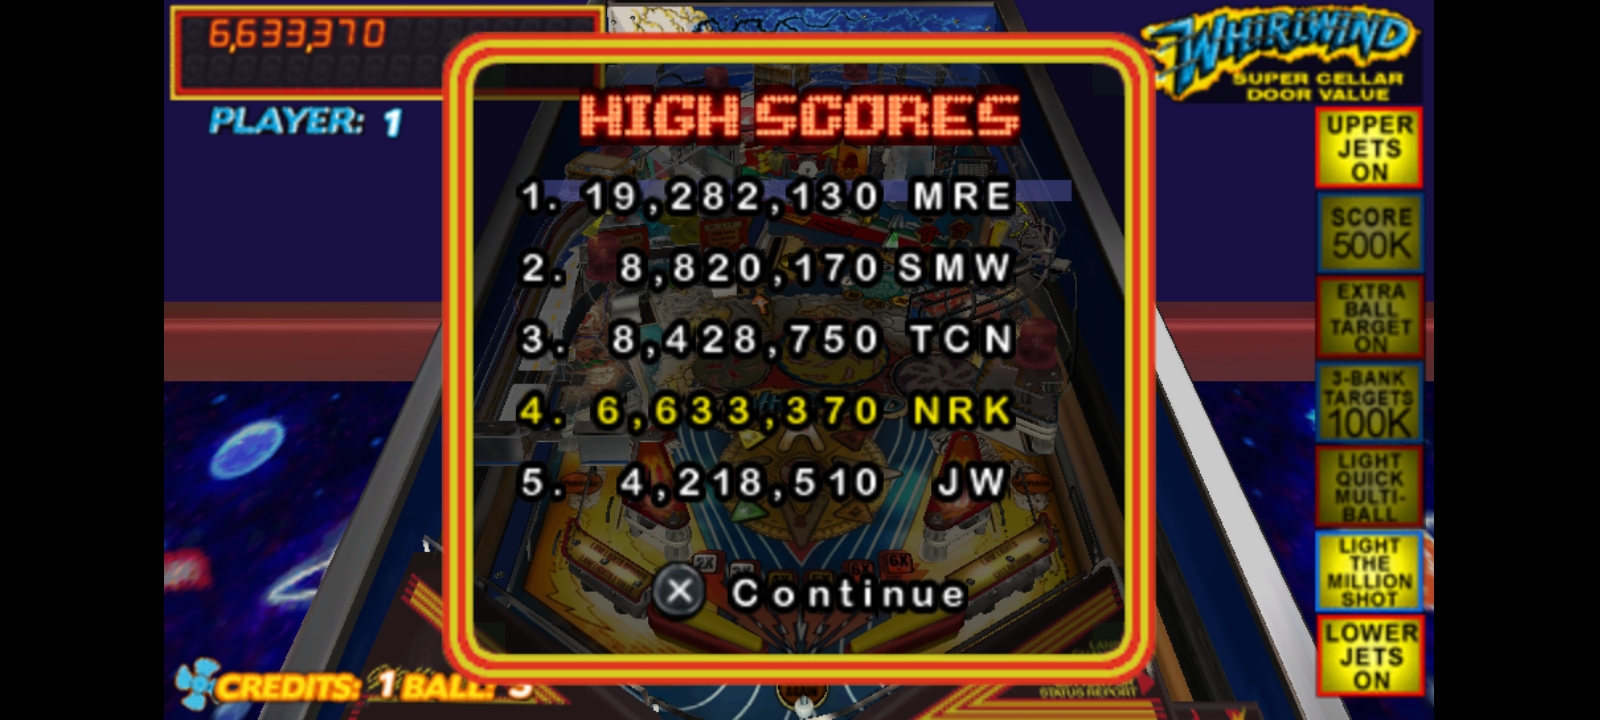 Hauntedprogram: Pinball Hall Of Fame: The Williams Collection: Whirlwind (PSP Emulated) 6,633,370 points on 2022-07-23 11:37:15